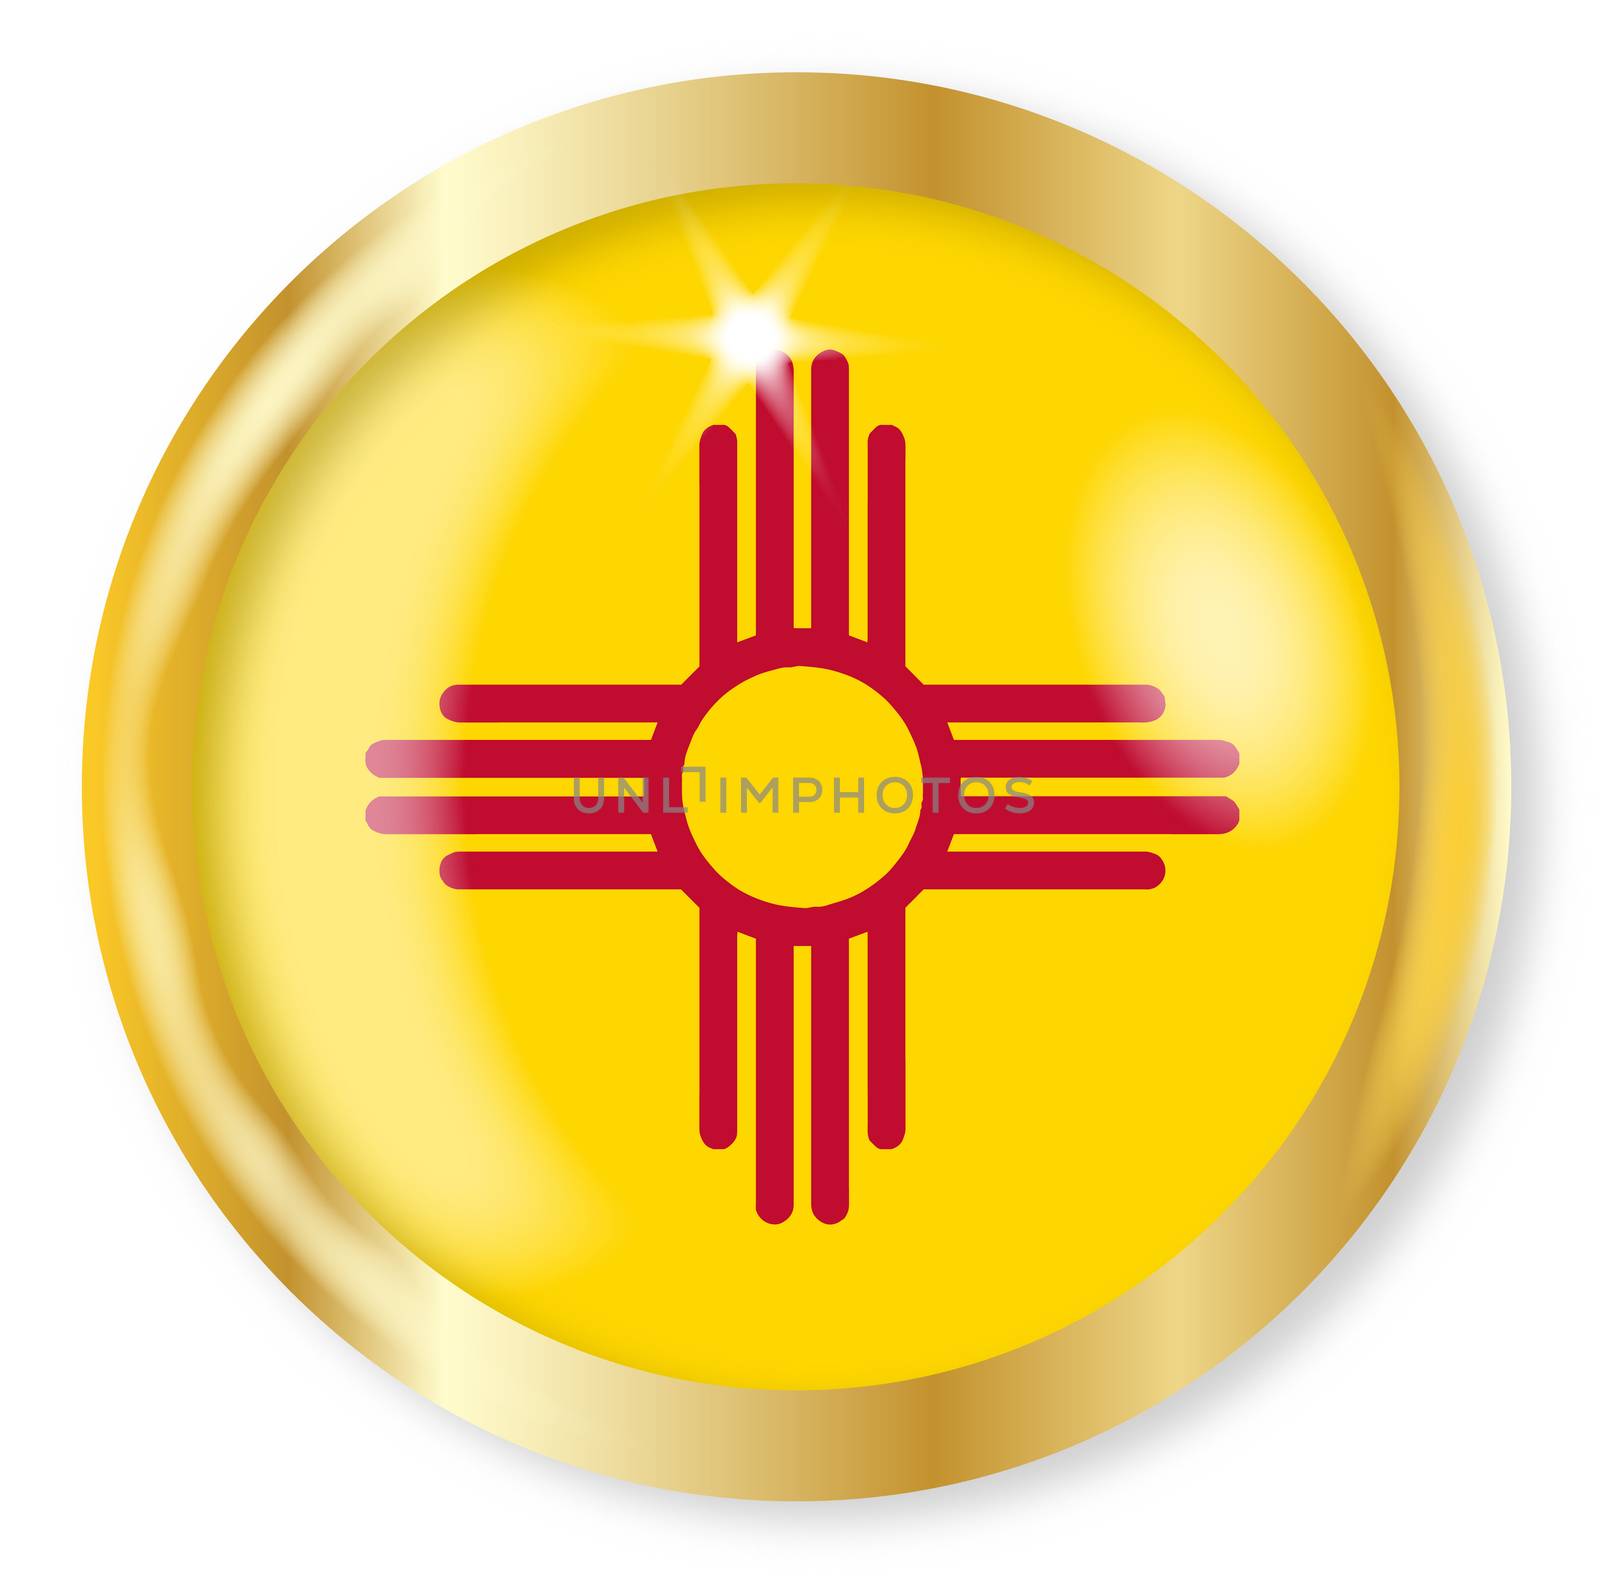 New Mexico state flag button with a gold metal circular border over a white background